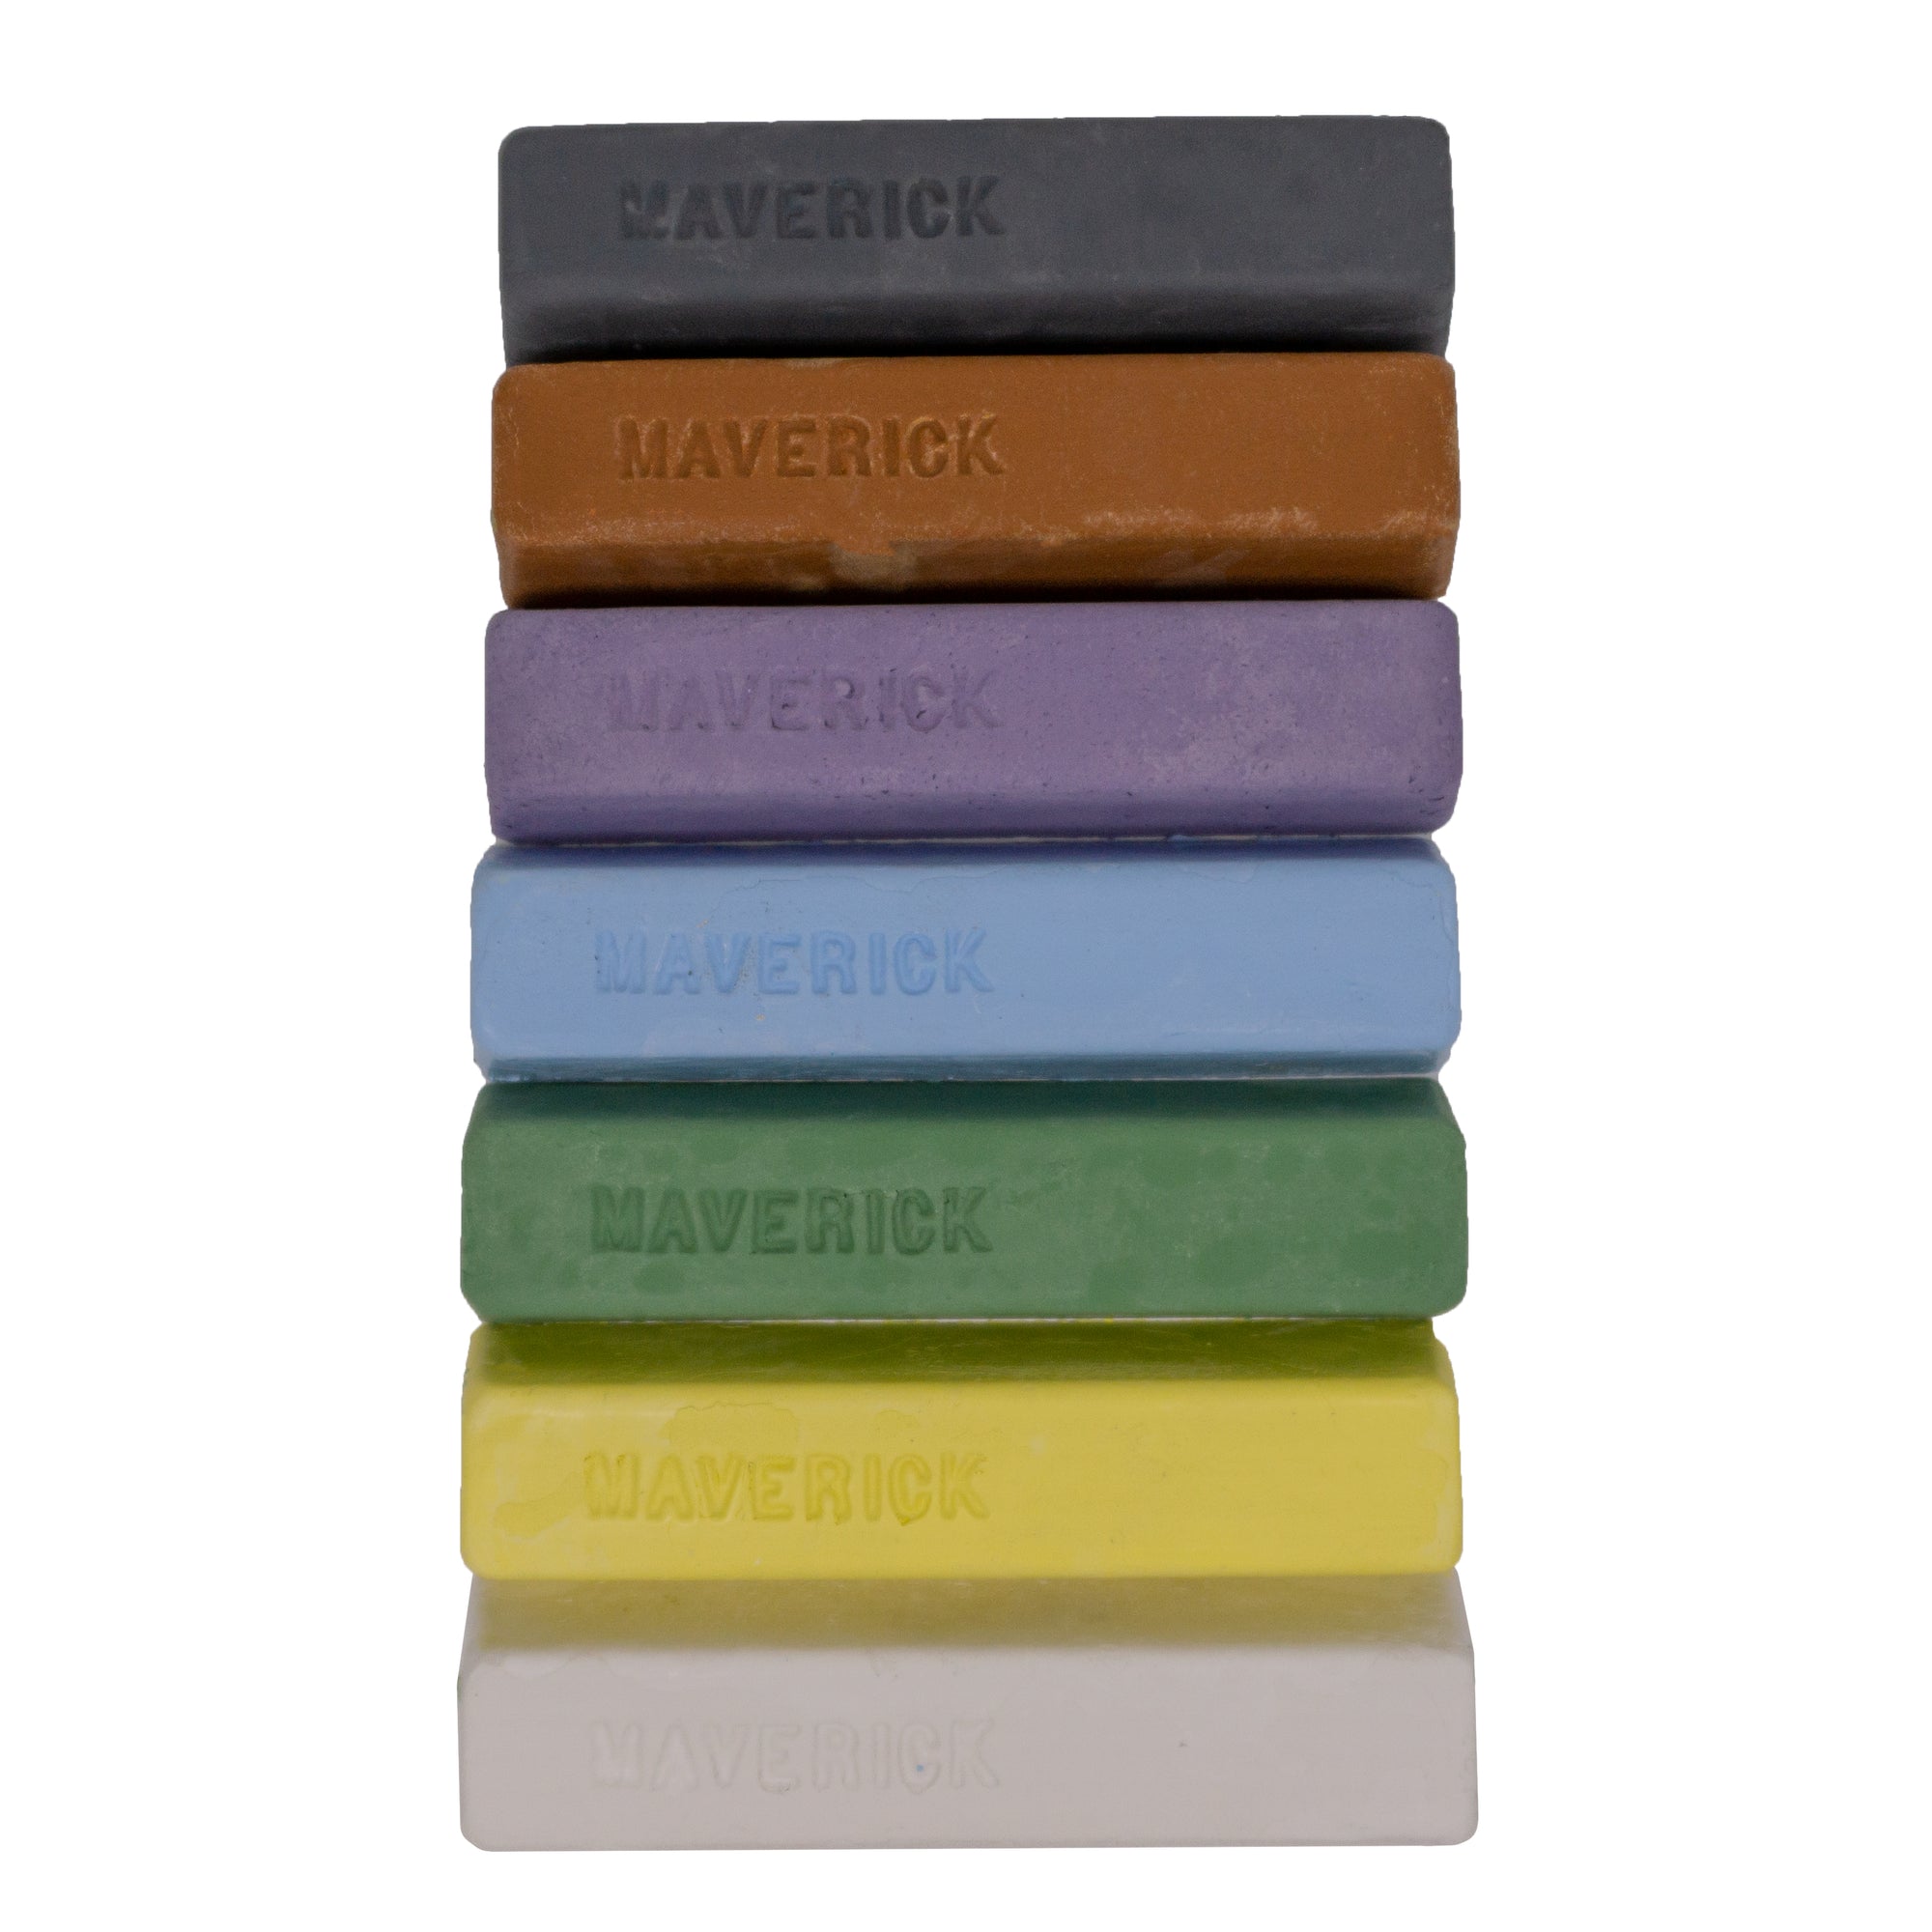 Renegade Products USA Assortment of Compound Polishing Bars, arranged to showcase the various types and colors. These specialized bars are designed for different polishing applications, each formulated for use on specific materials and finishes. Ideal for both professional and home use, they offer a tailored polishing experience for various surfaces.